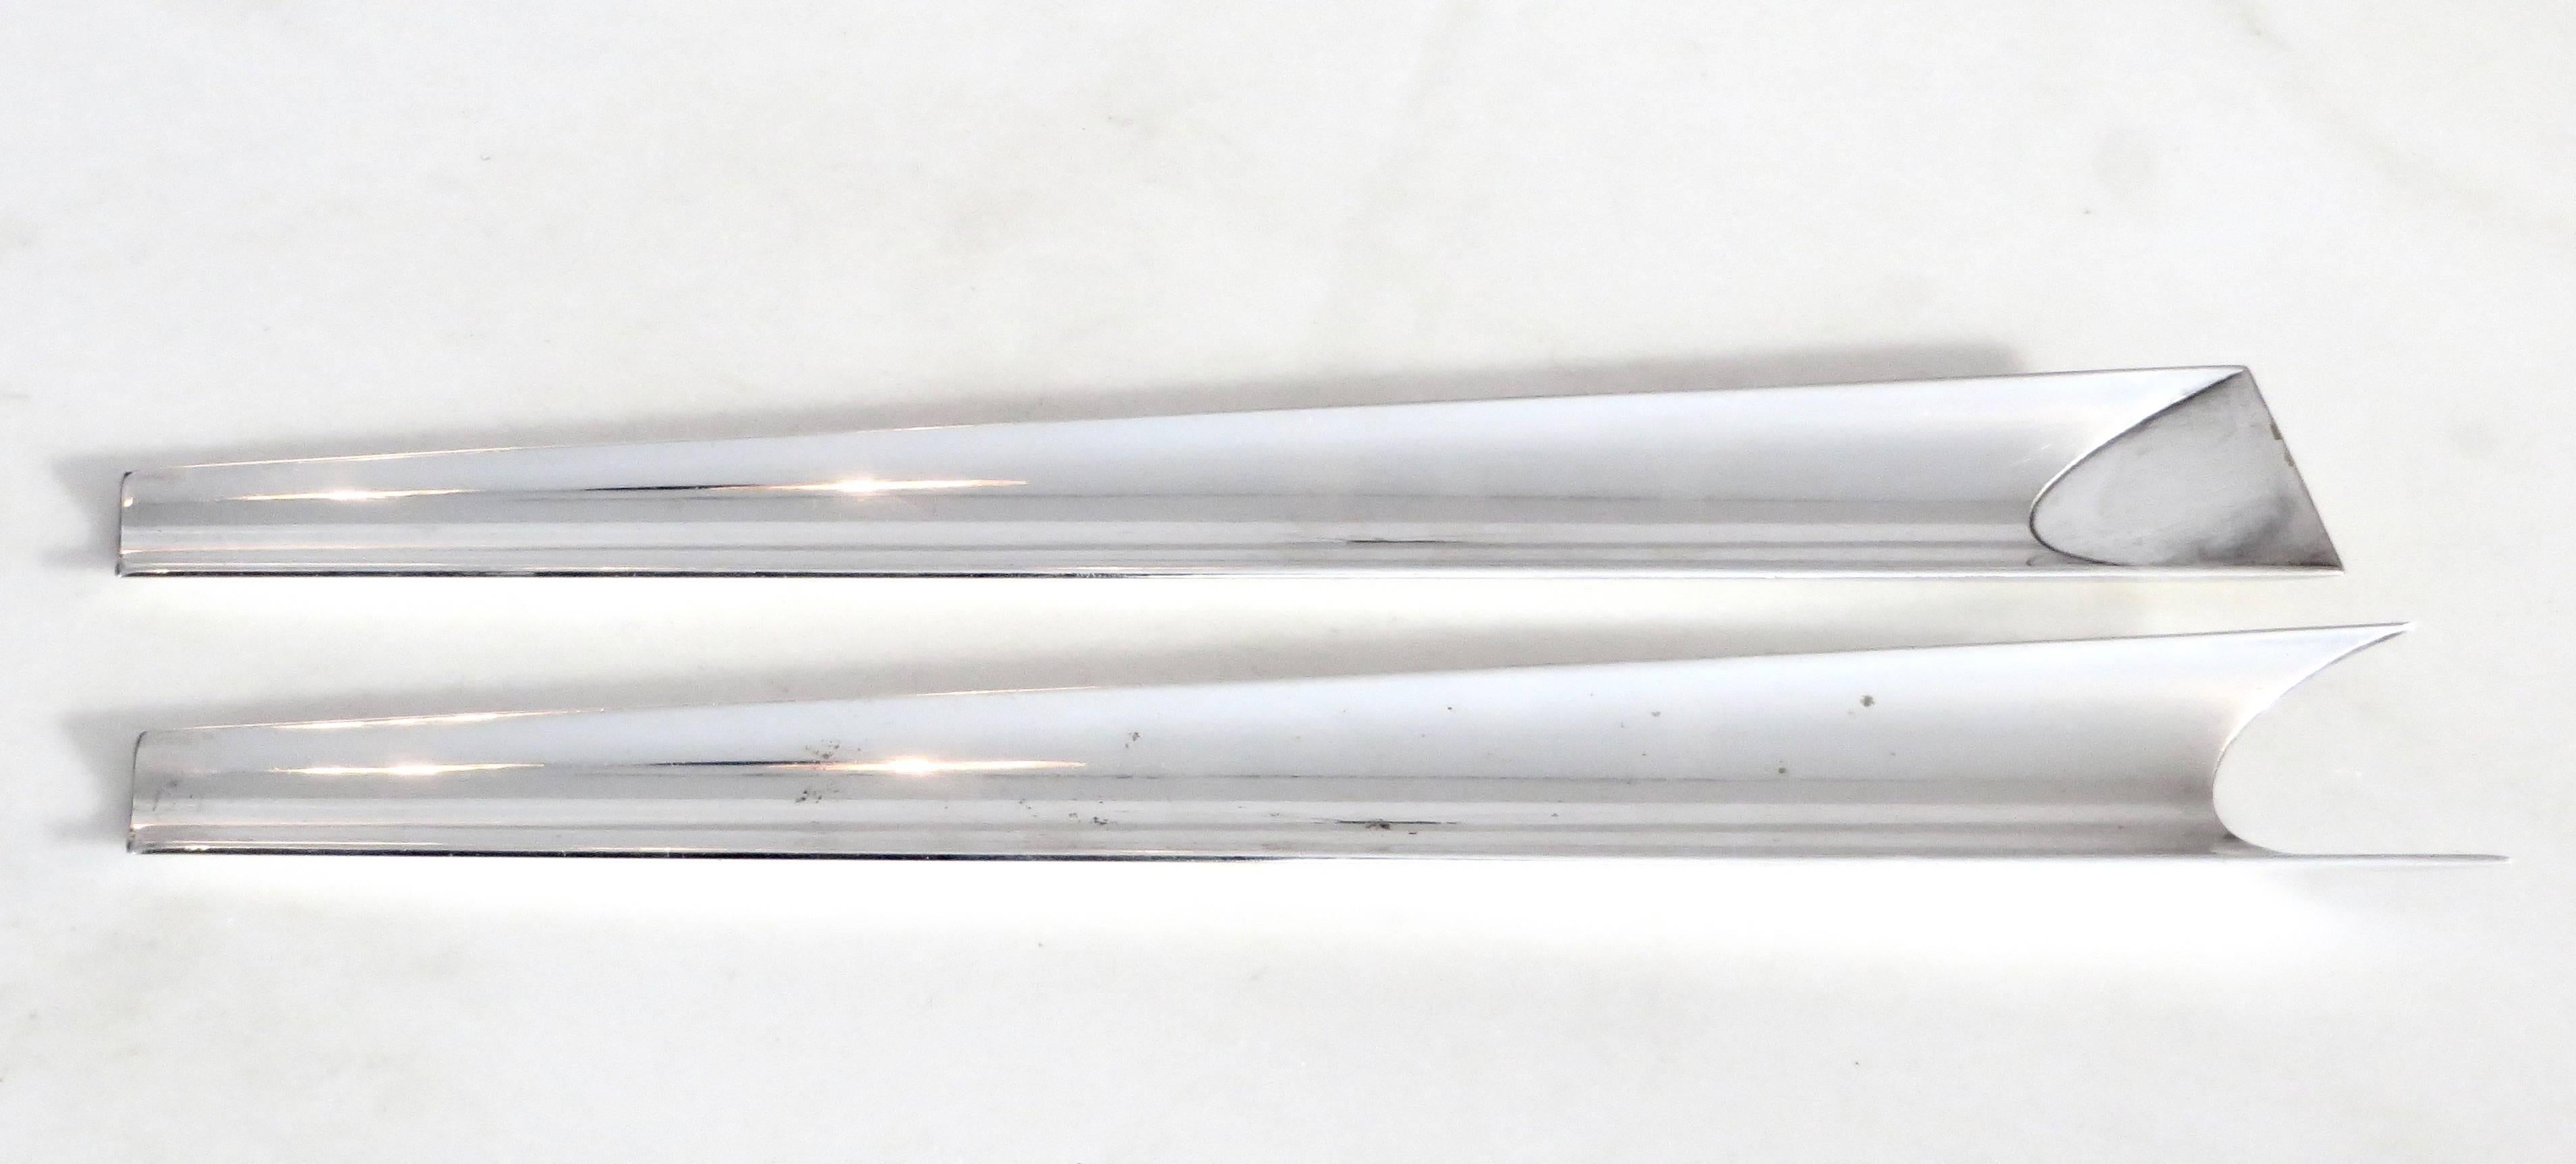 Lino Sabattini very unusual and very modern in design salad server set. Silver-plate. 
Stamped and signed.
Excellent condition with signs of normal wear. 
No dings or flaws. 
Bregnano workshop. Limited edition. 
Made in Italy: 45 Jahre Design in